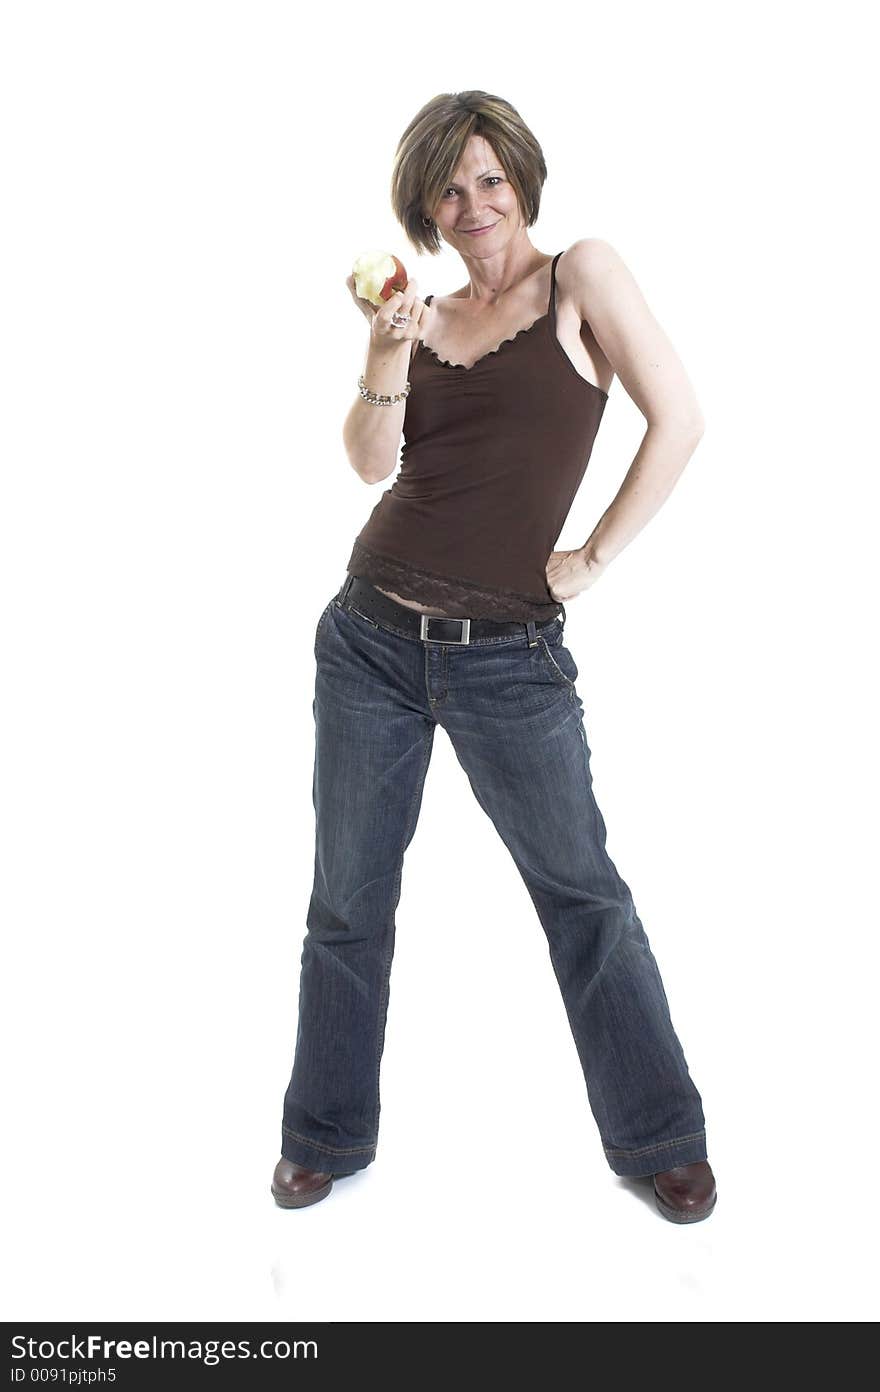 Woman eating an apple over white background